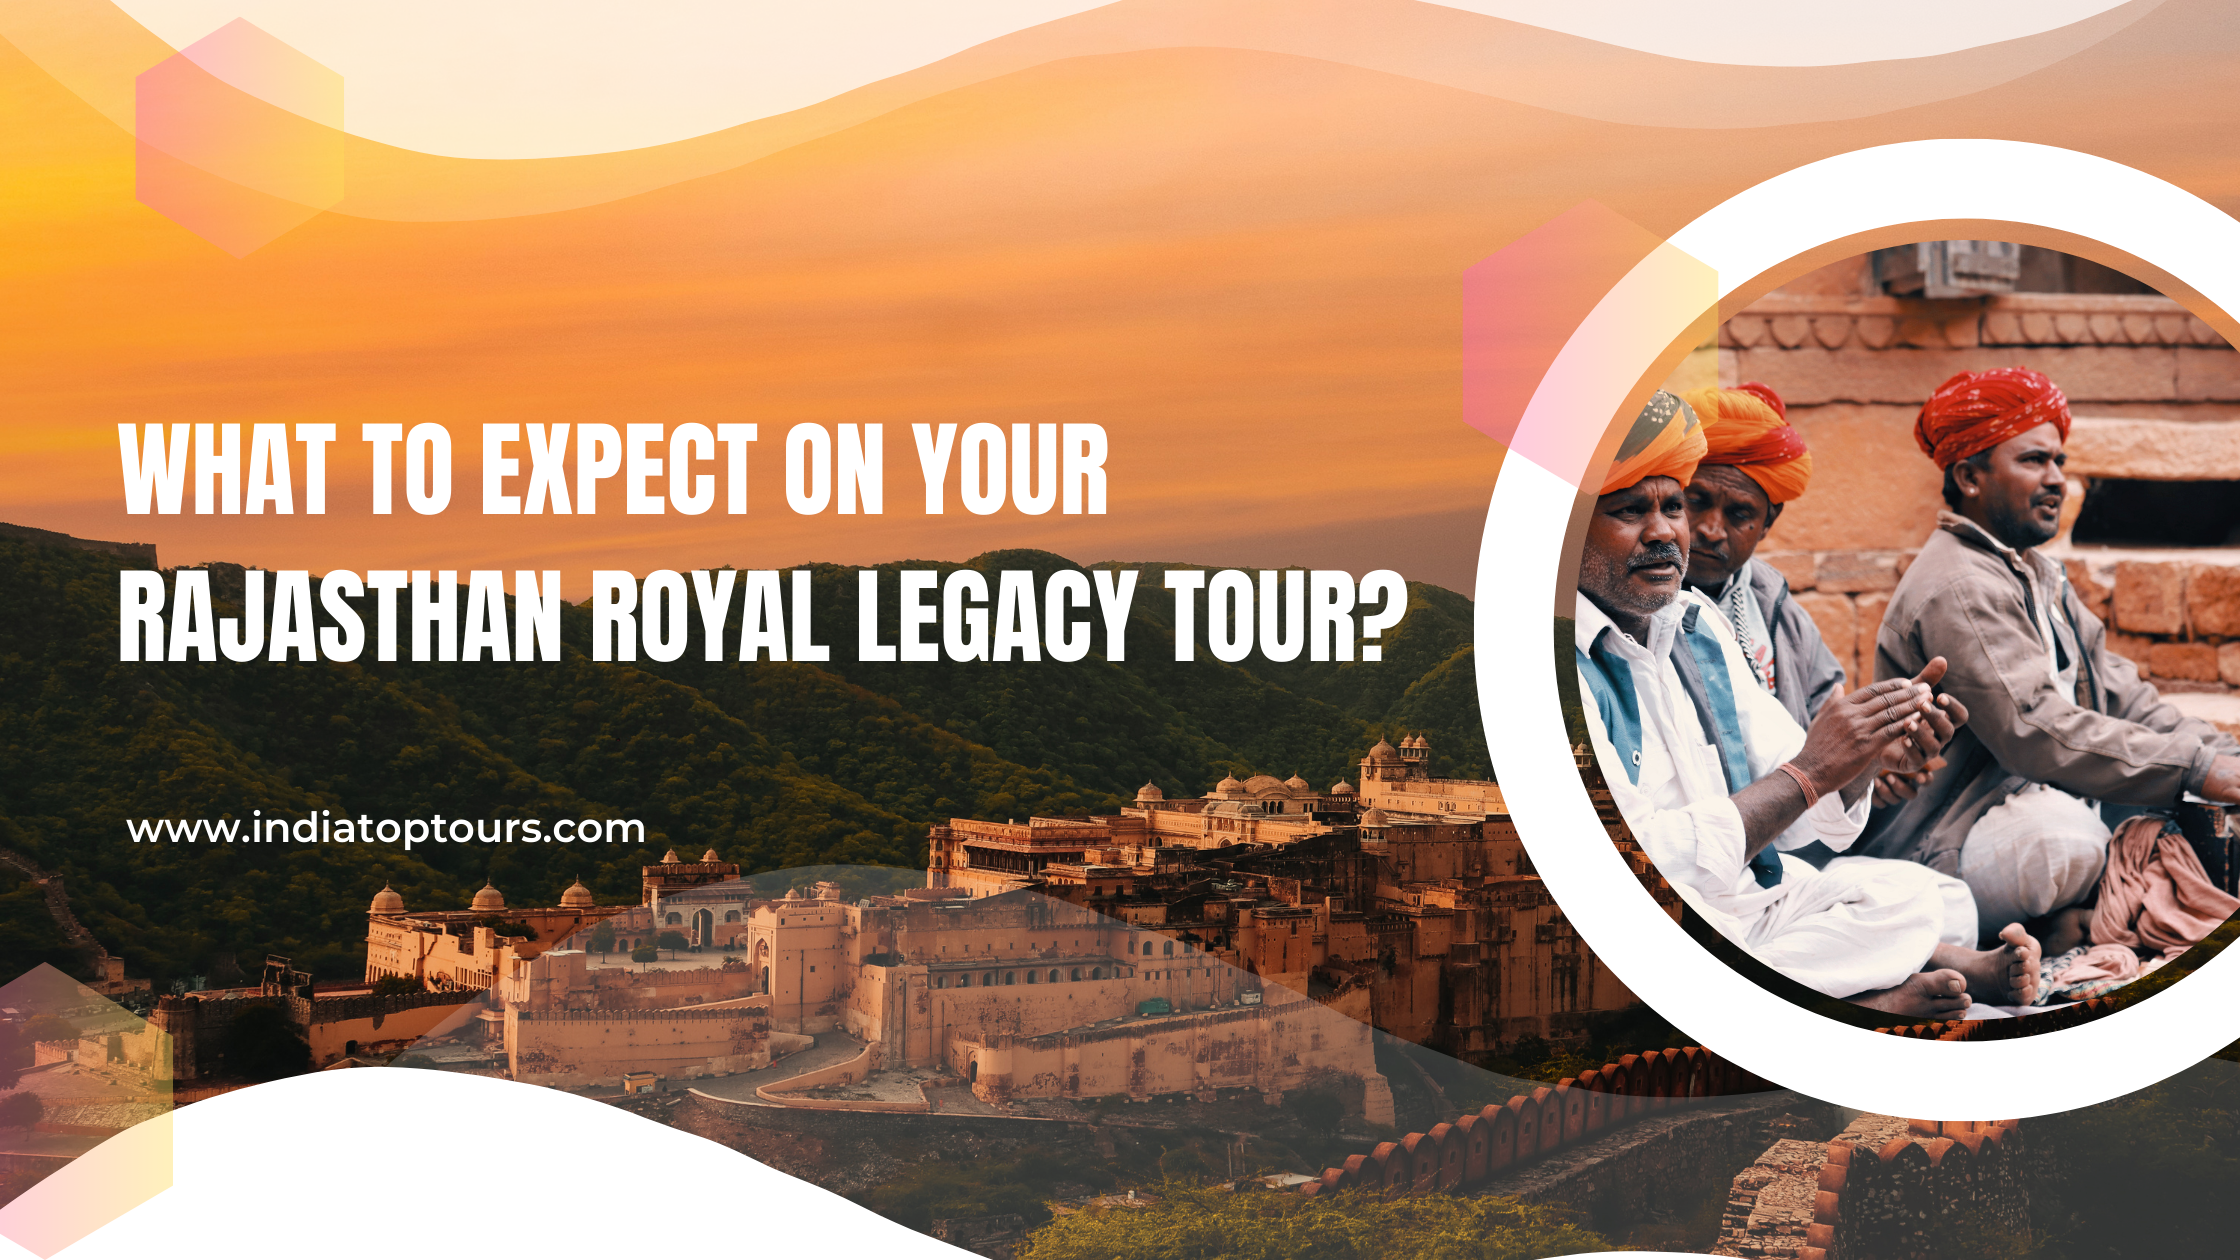 What to Expect on Your Rajasthan Royal Legacy Tour?